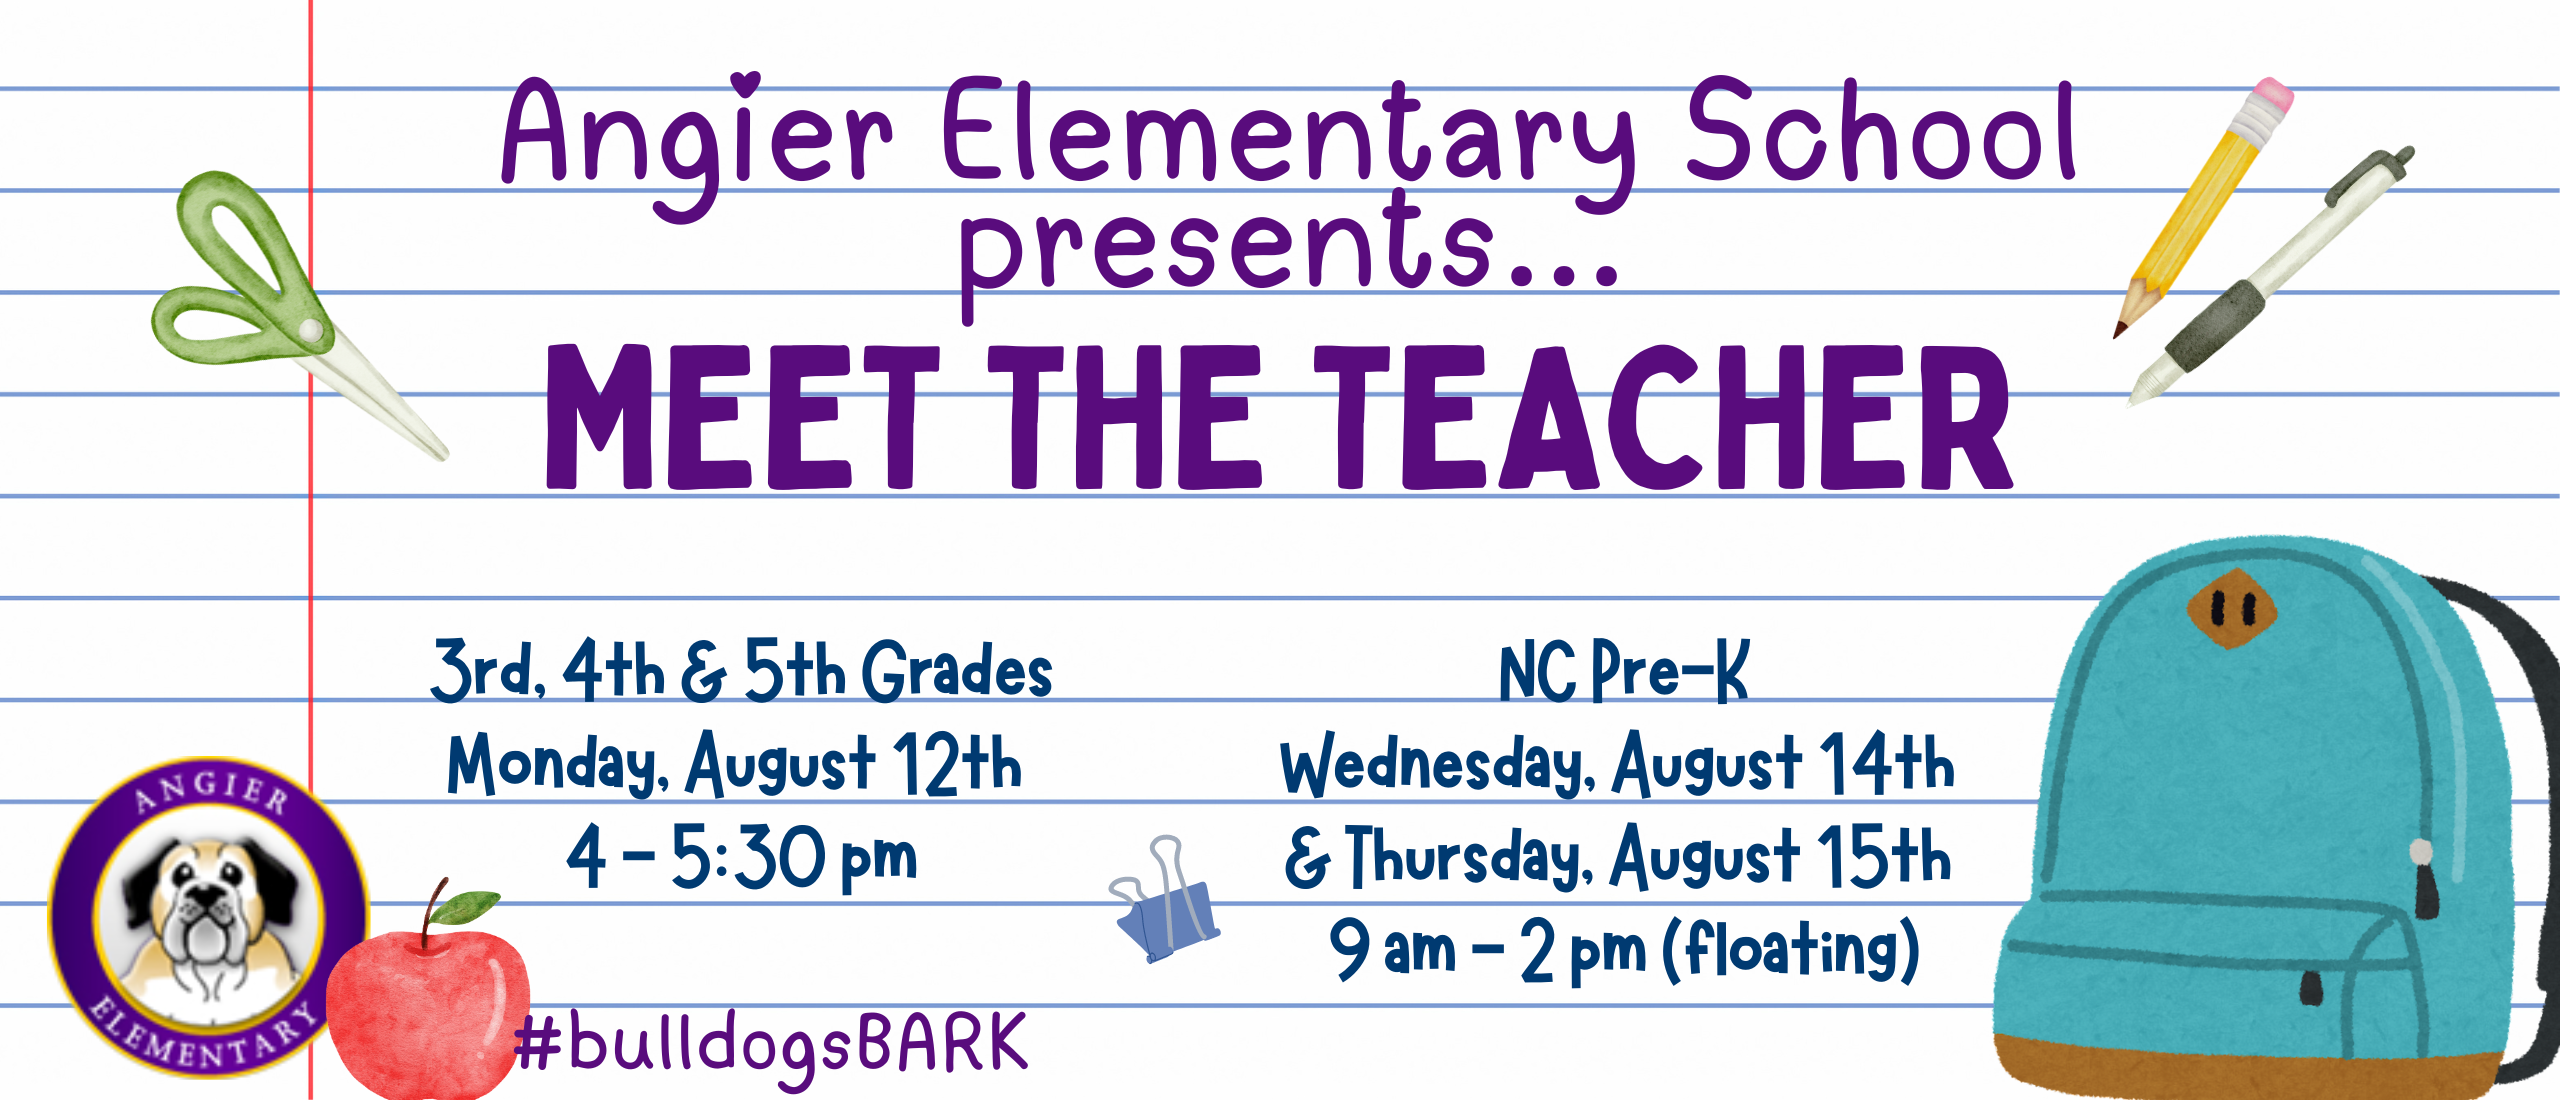 Angier Elementary's meet the teacher night on Monday, August 12th, from 4 until  5:30pm